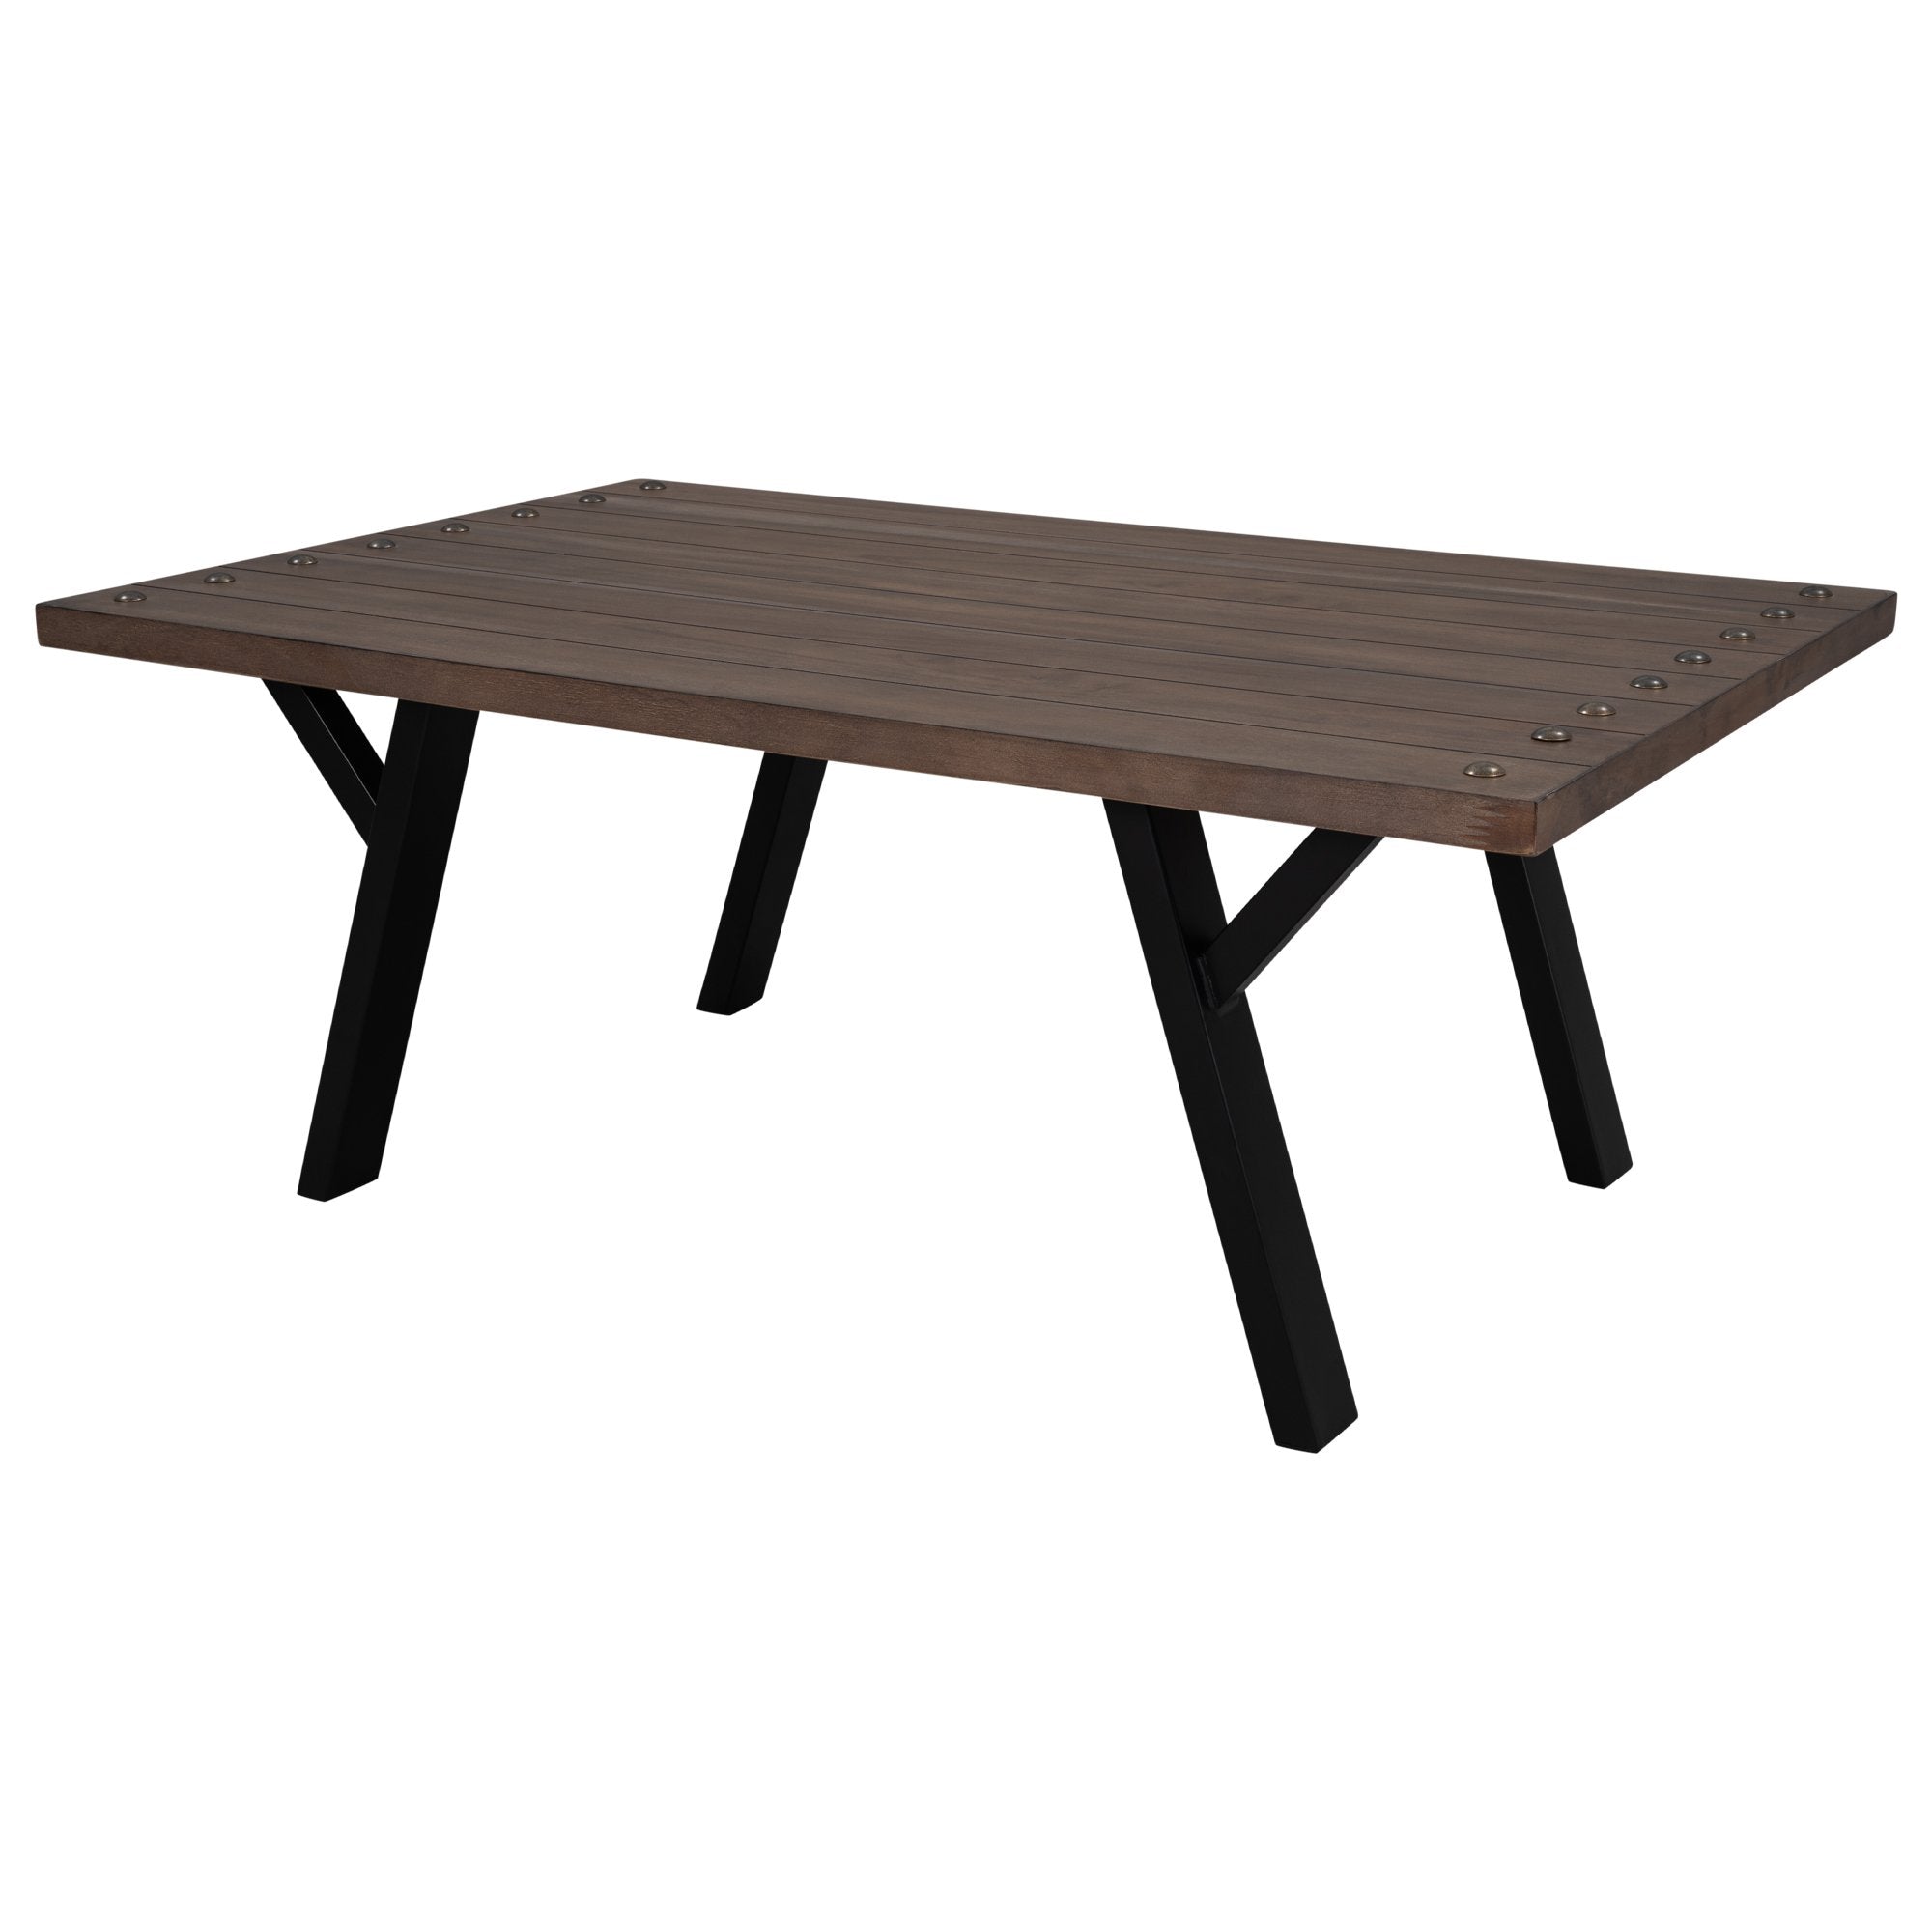 Rustic Coffee table, Wood Top and Metal Legs Table for Living Room,43"-Boyel Living